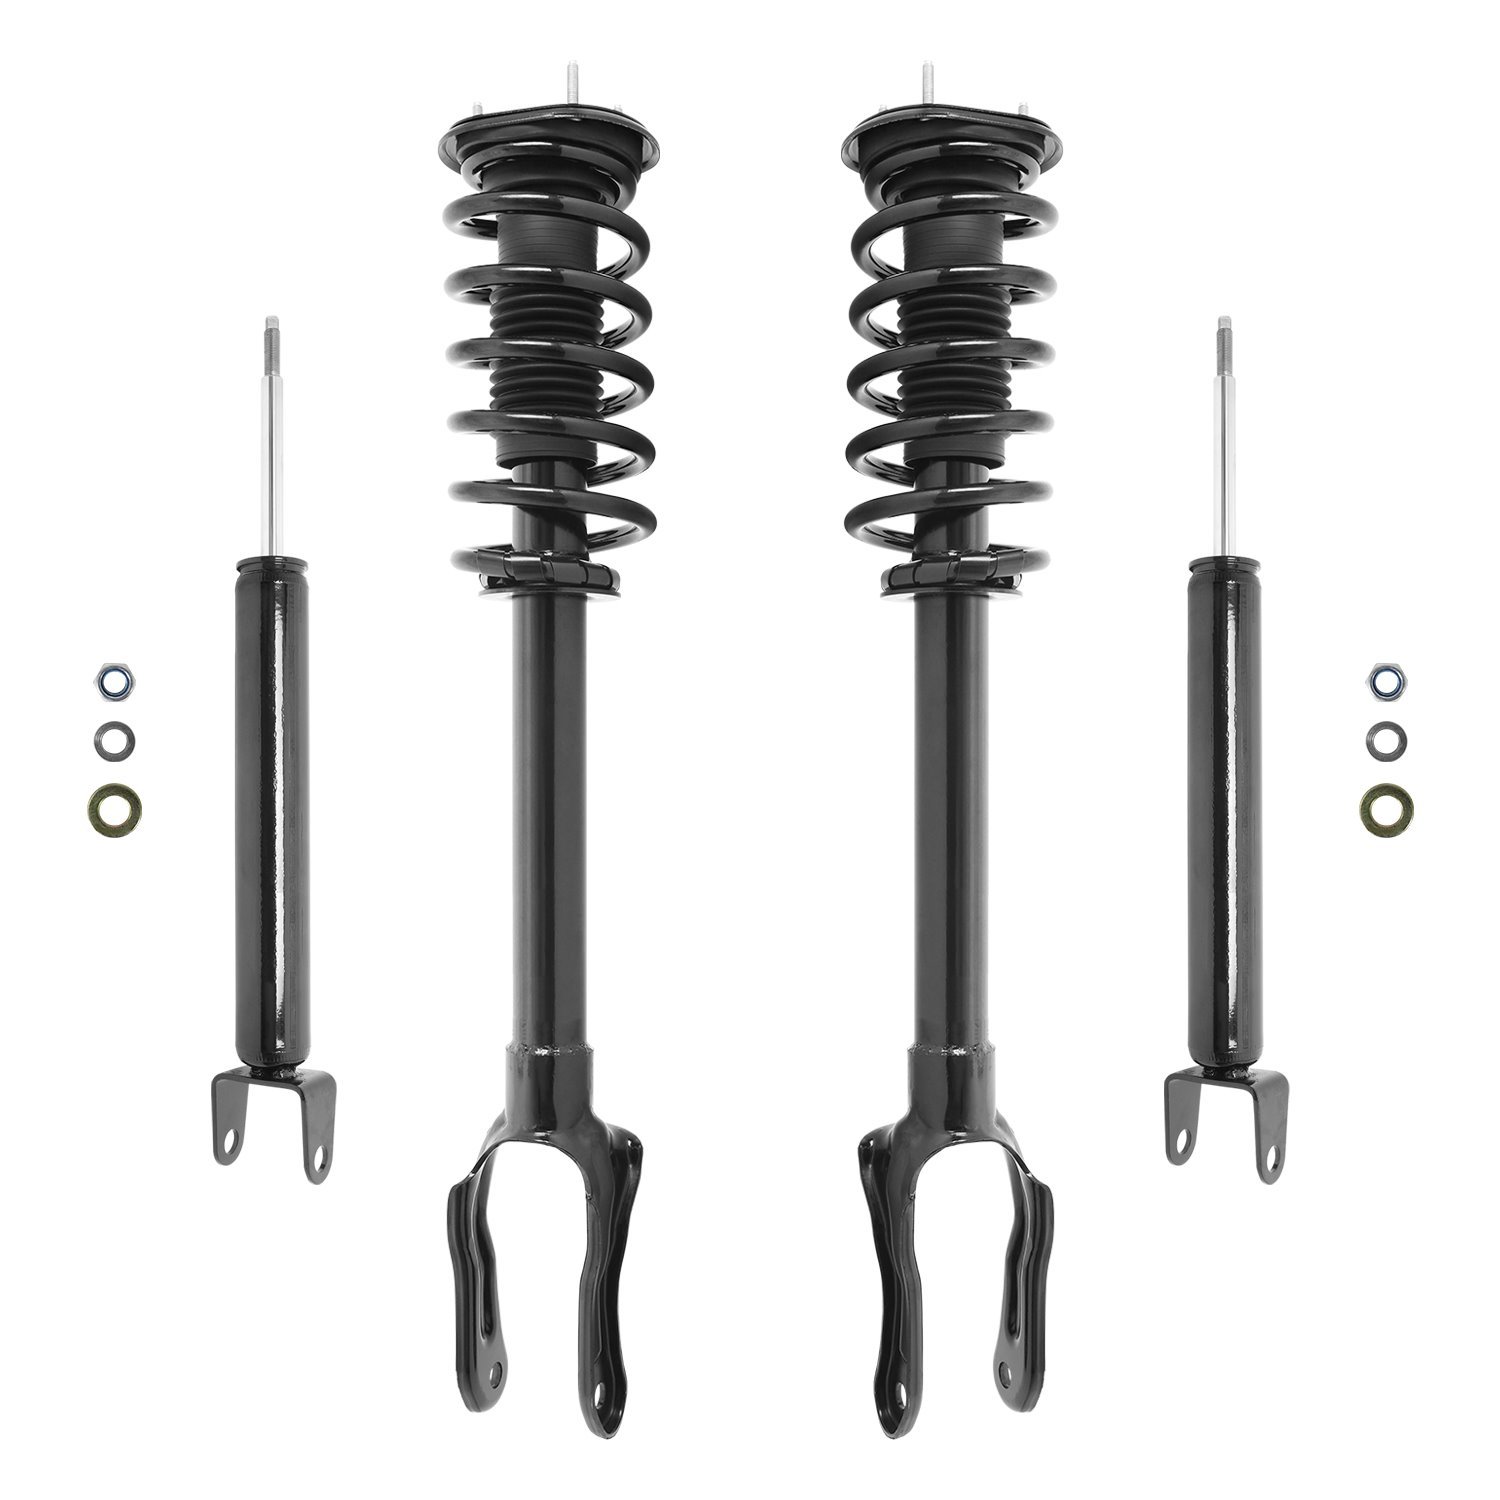 4-11817-256500-001 Front & Rear Suspension Strut & Coil Spring Assembly Fits Select Dodge Durango